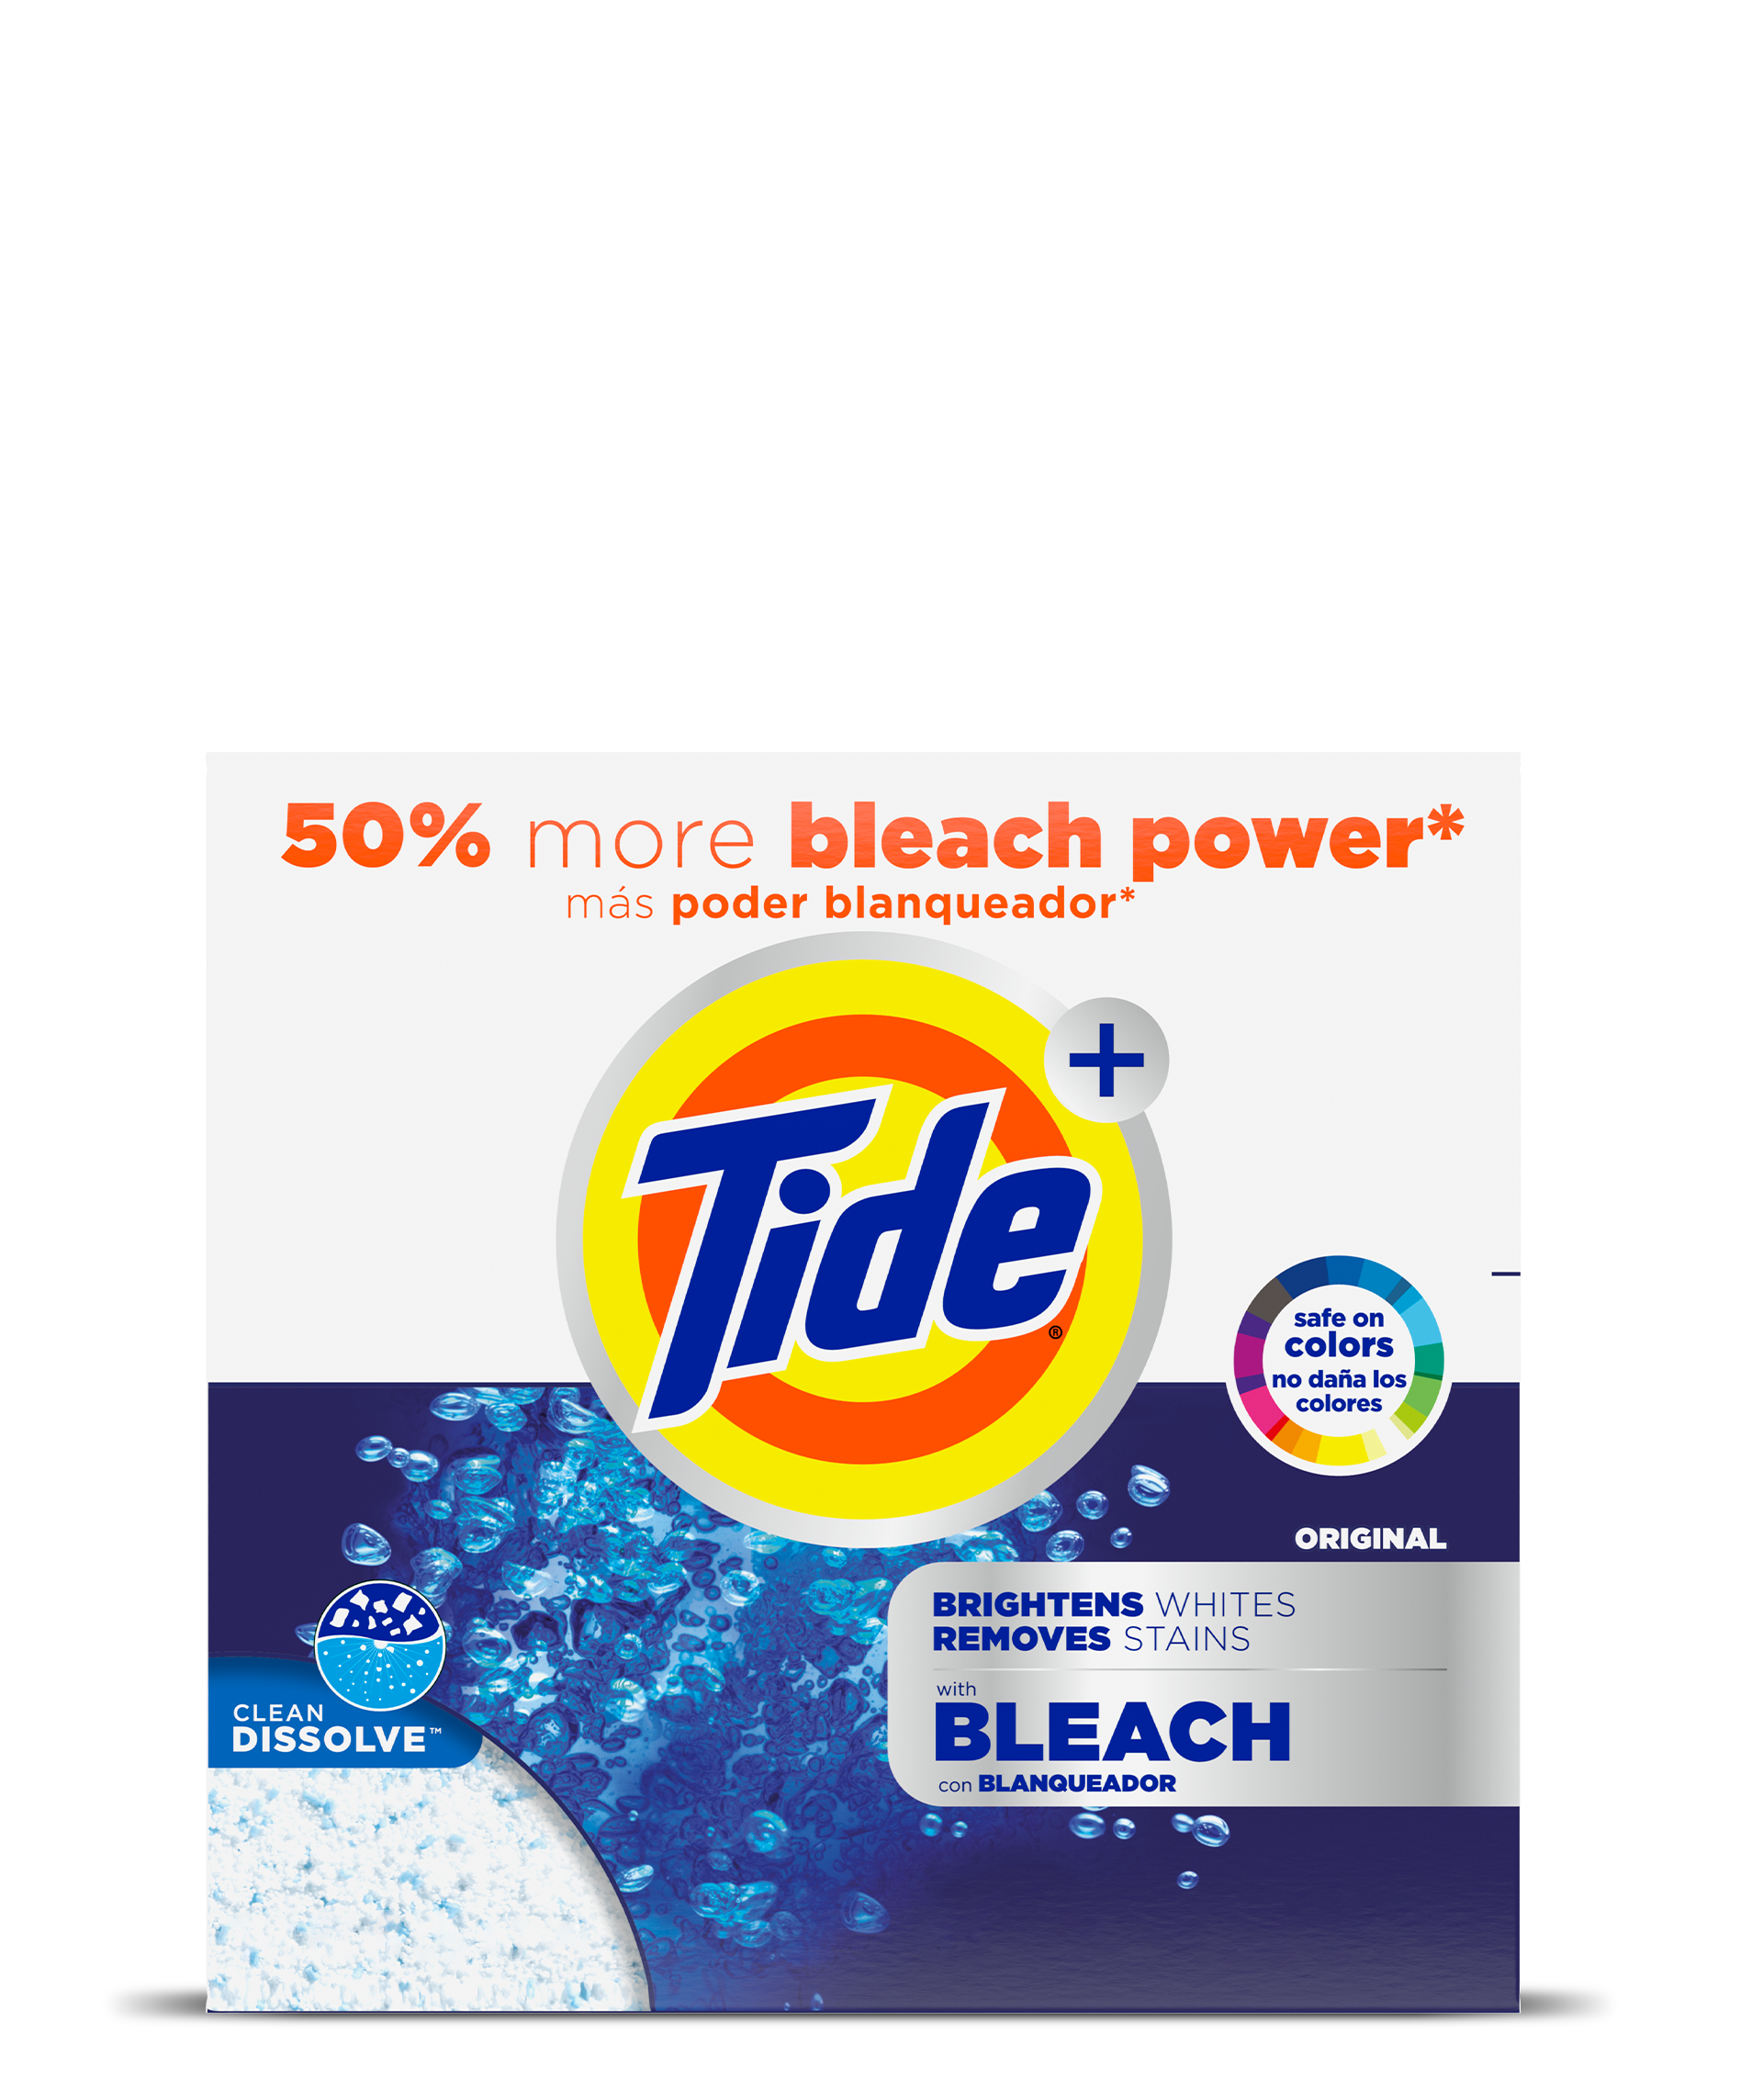 Can You Bleach White Towels With a Do Not Bleach Label?